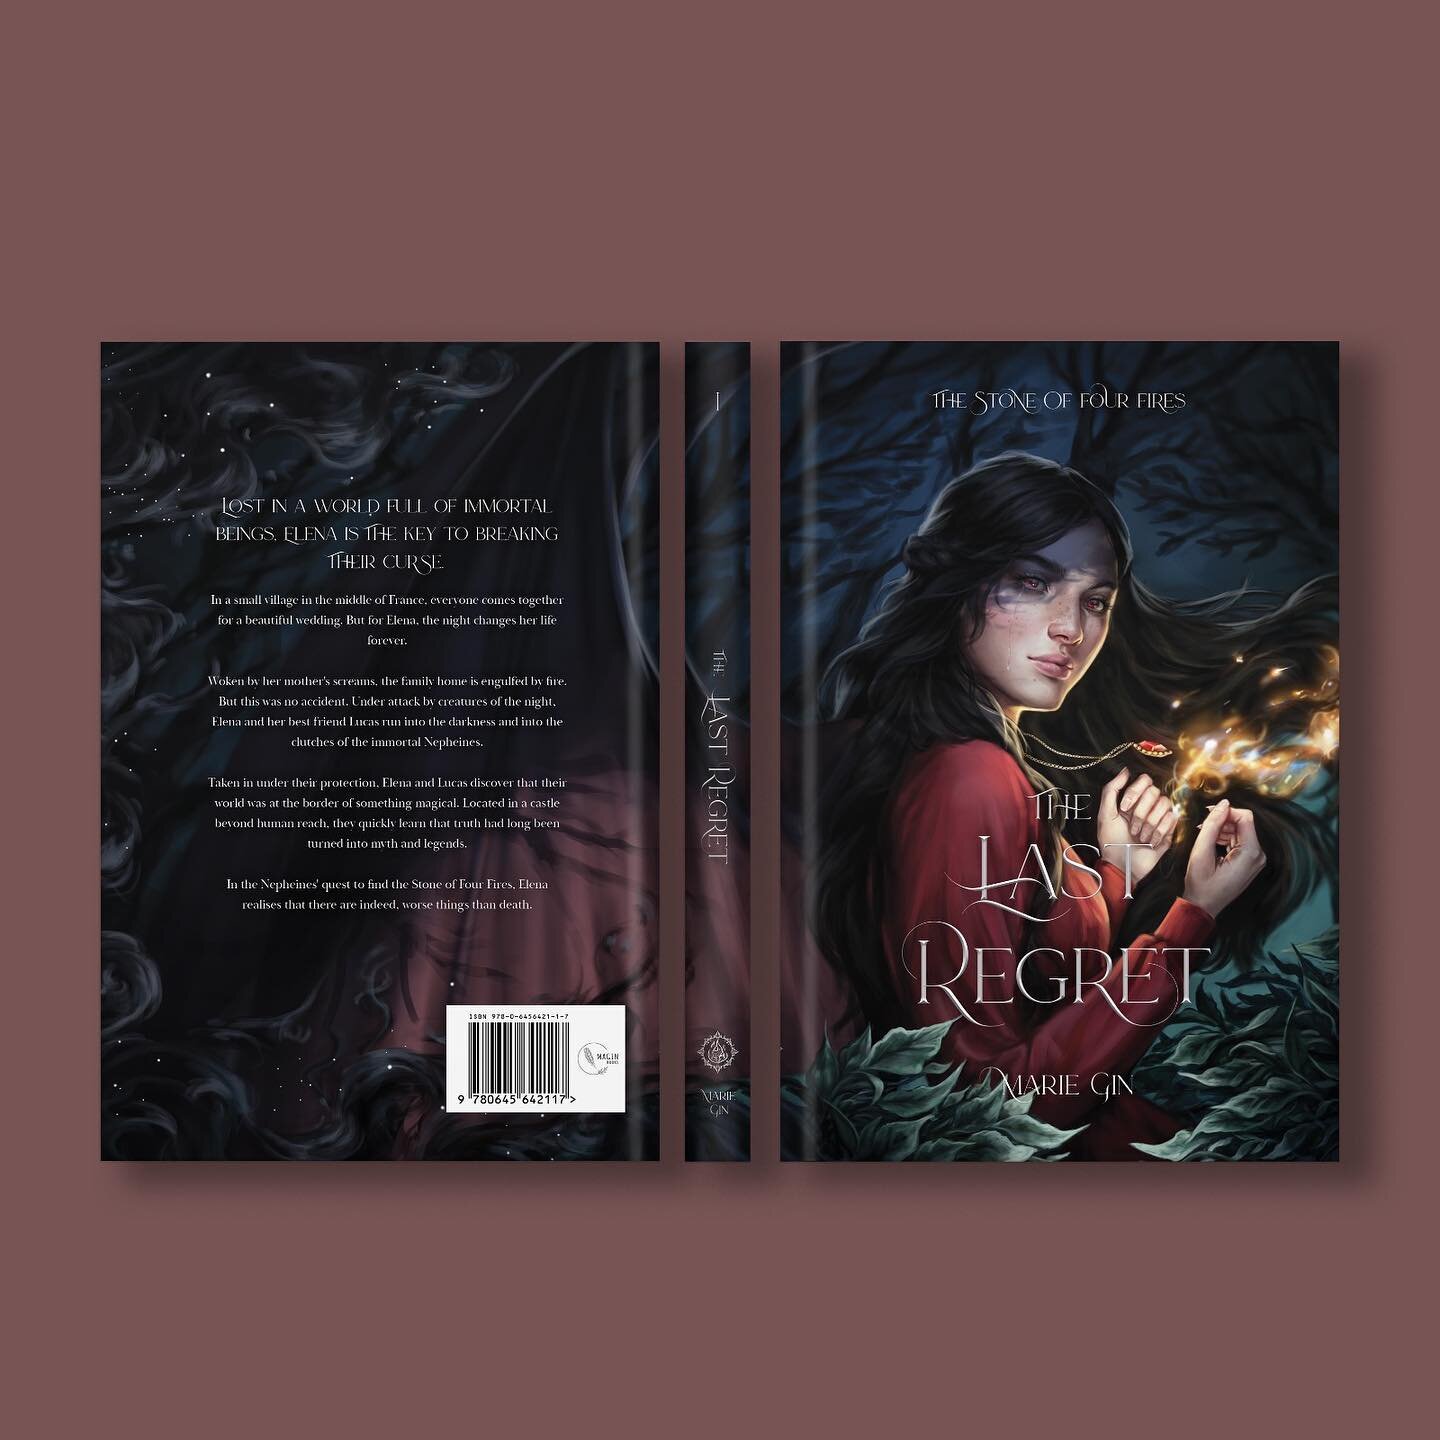 New cover reveal! Thank you to the amazingly talented @sashac_art for her absolutely stunning work on this cover. The new cover comes with a rewrite of book 1 that sees Elena aged at the beginning of the book 🥰 New book available on Amazon soon! @sa